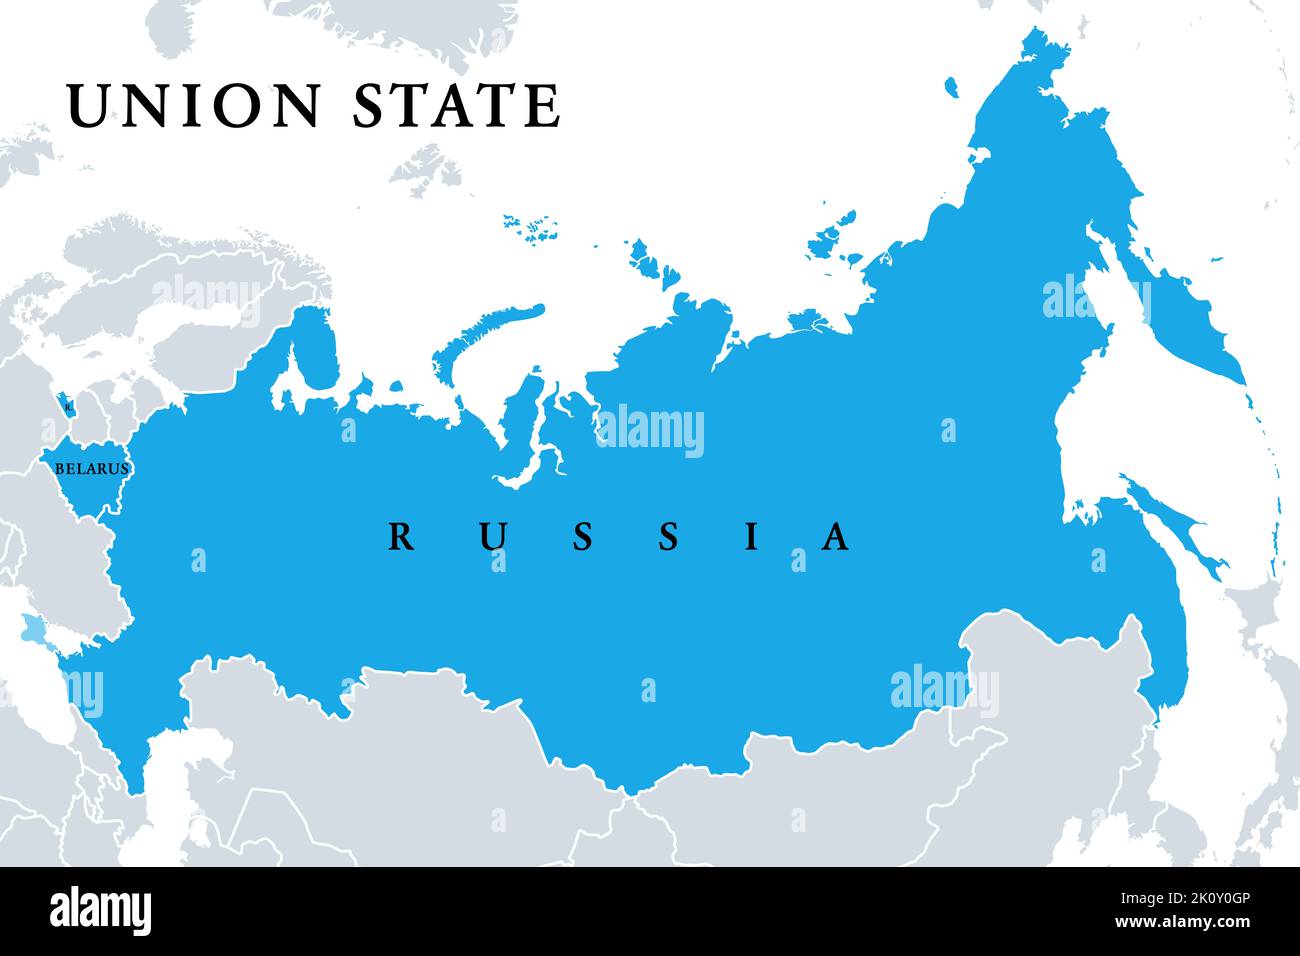 Union State, member states, political map. Officially the Union State of Russia and Belarus, is a supranational organisation. Stock Photo